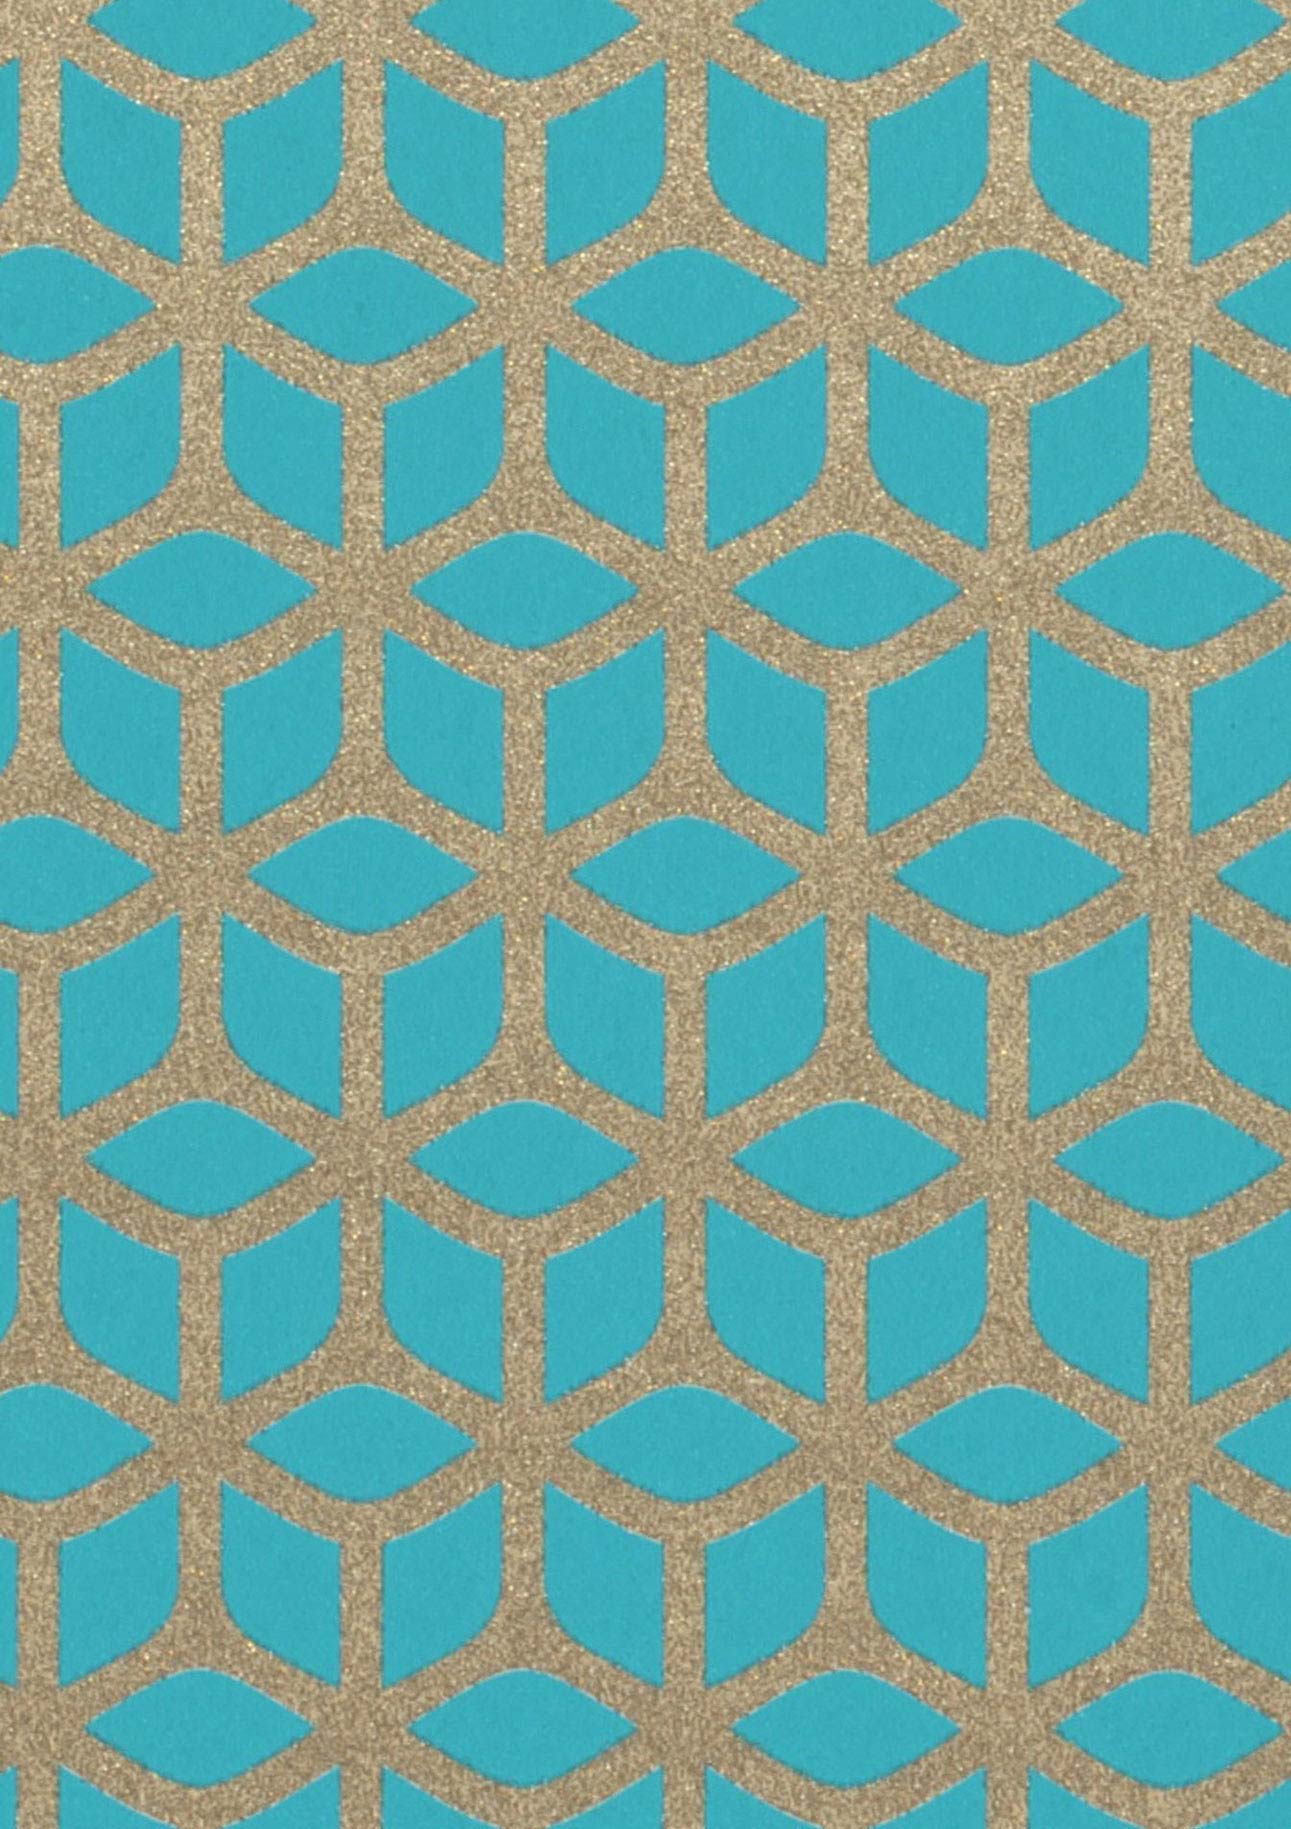 Moroccan Pattern Wallpapers - 4k, HD Moroccan Pattern Backgrounds on